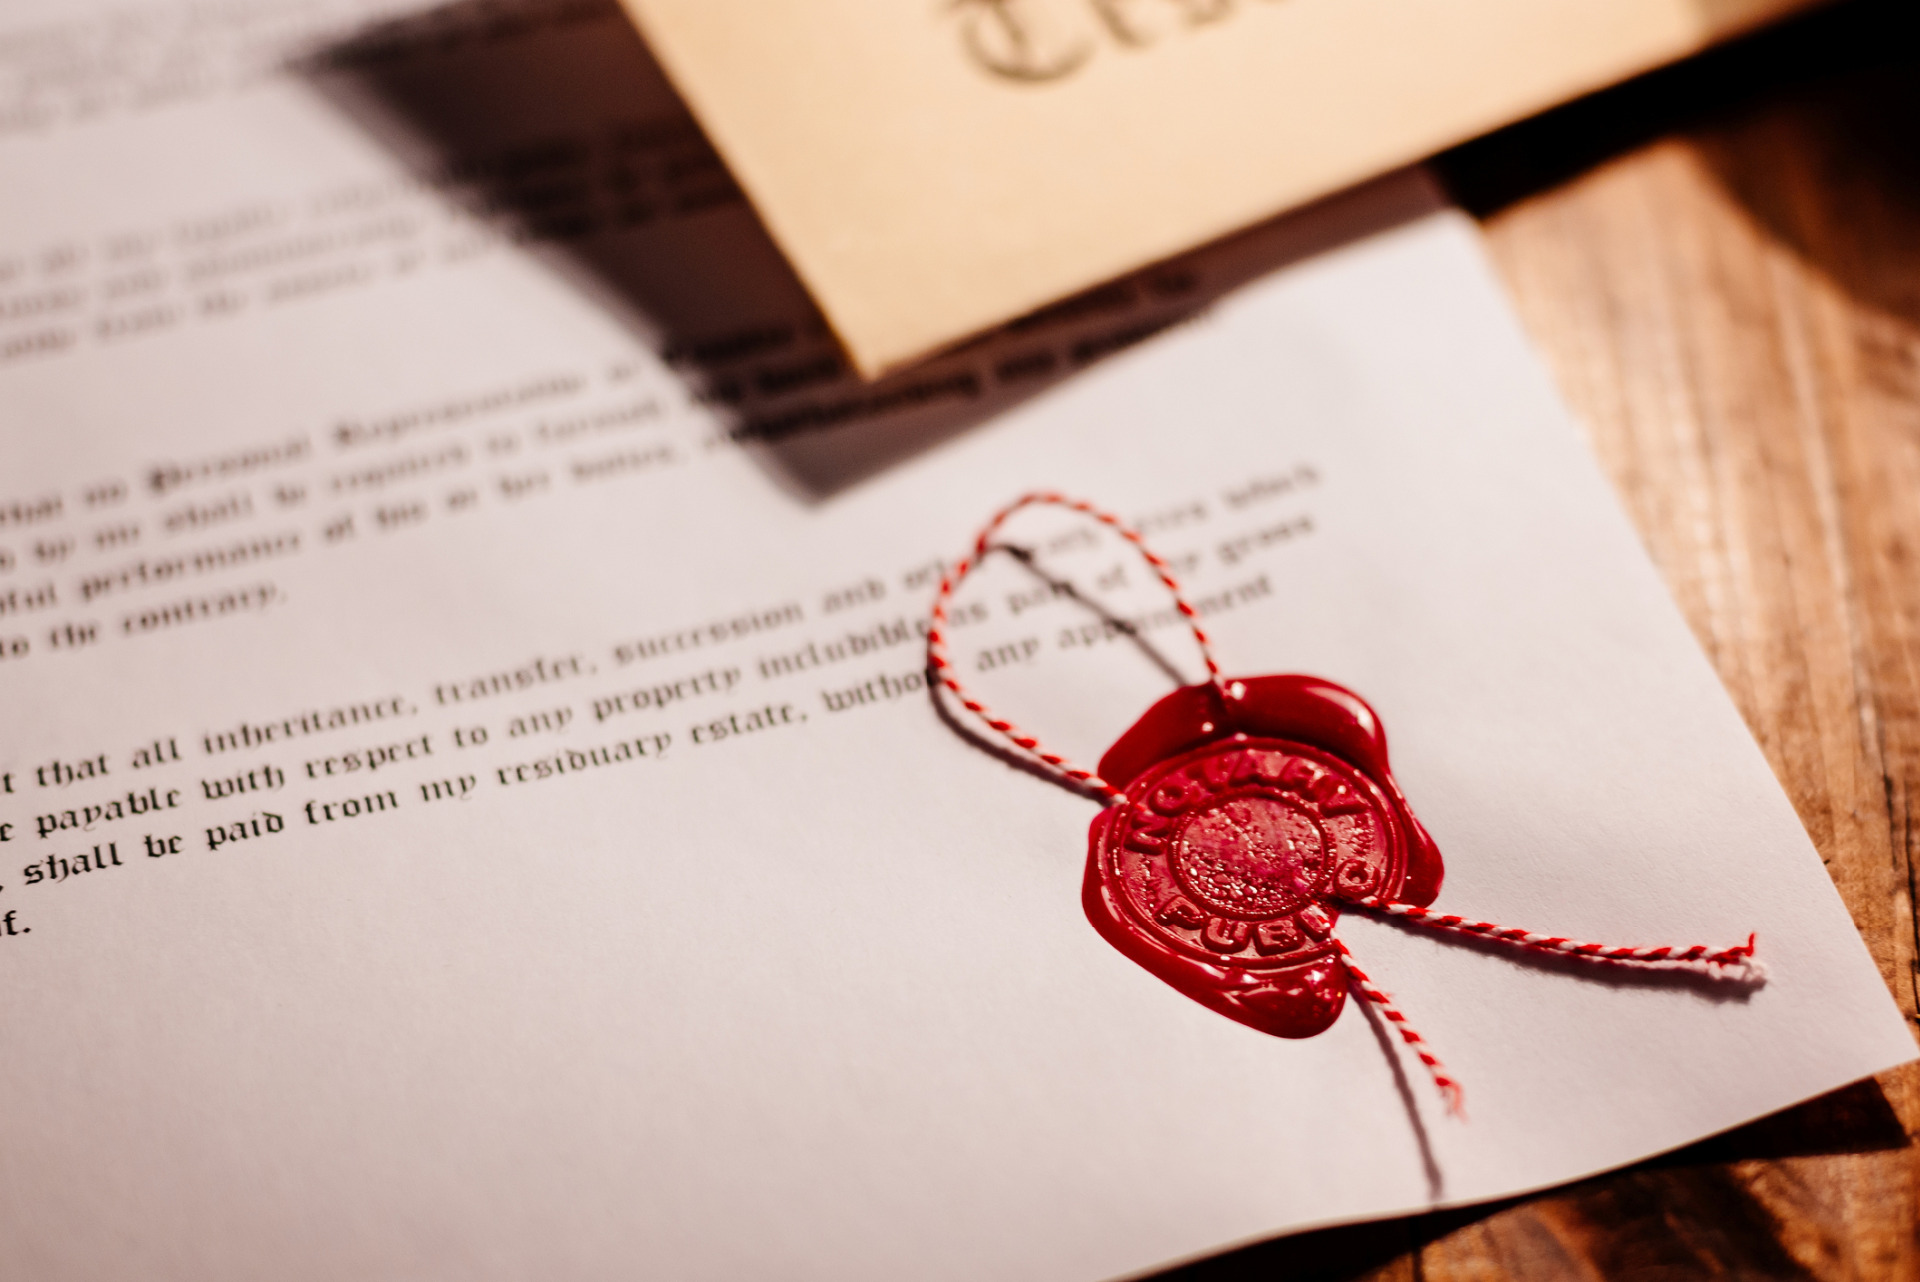 A Will with a red wax seal in the bottom - our Wills Solicitors in Lytham can assist with your Will writing needs